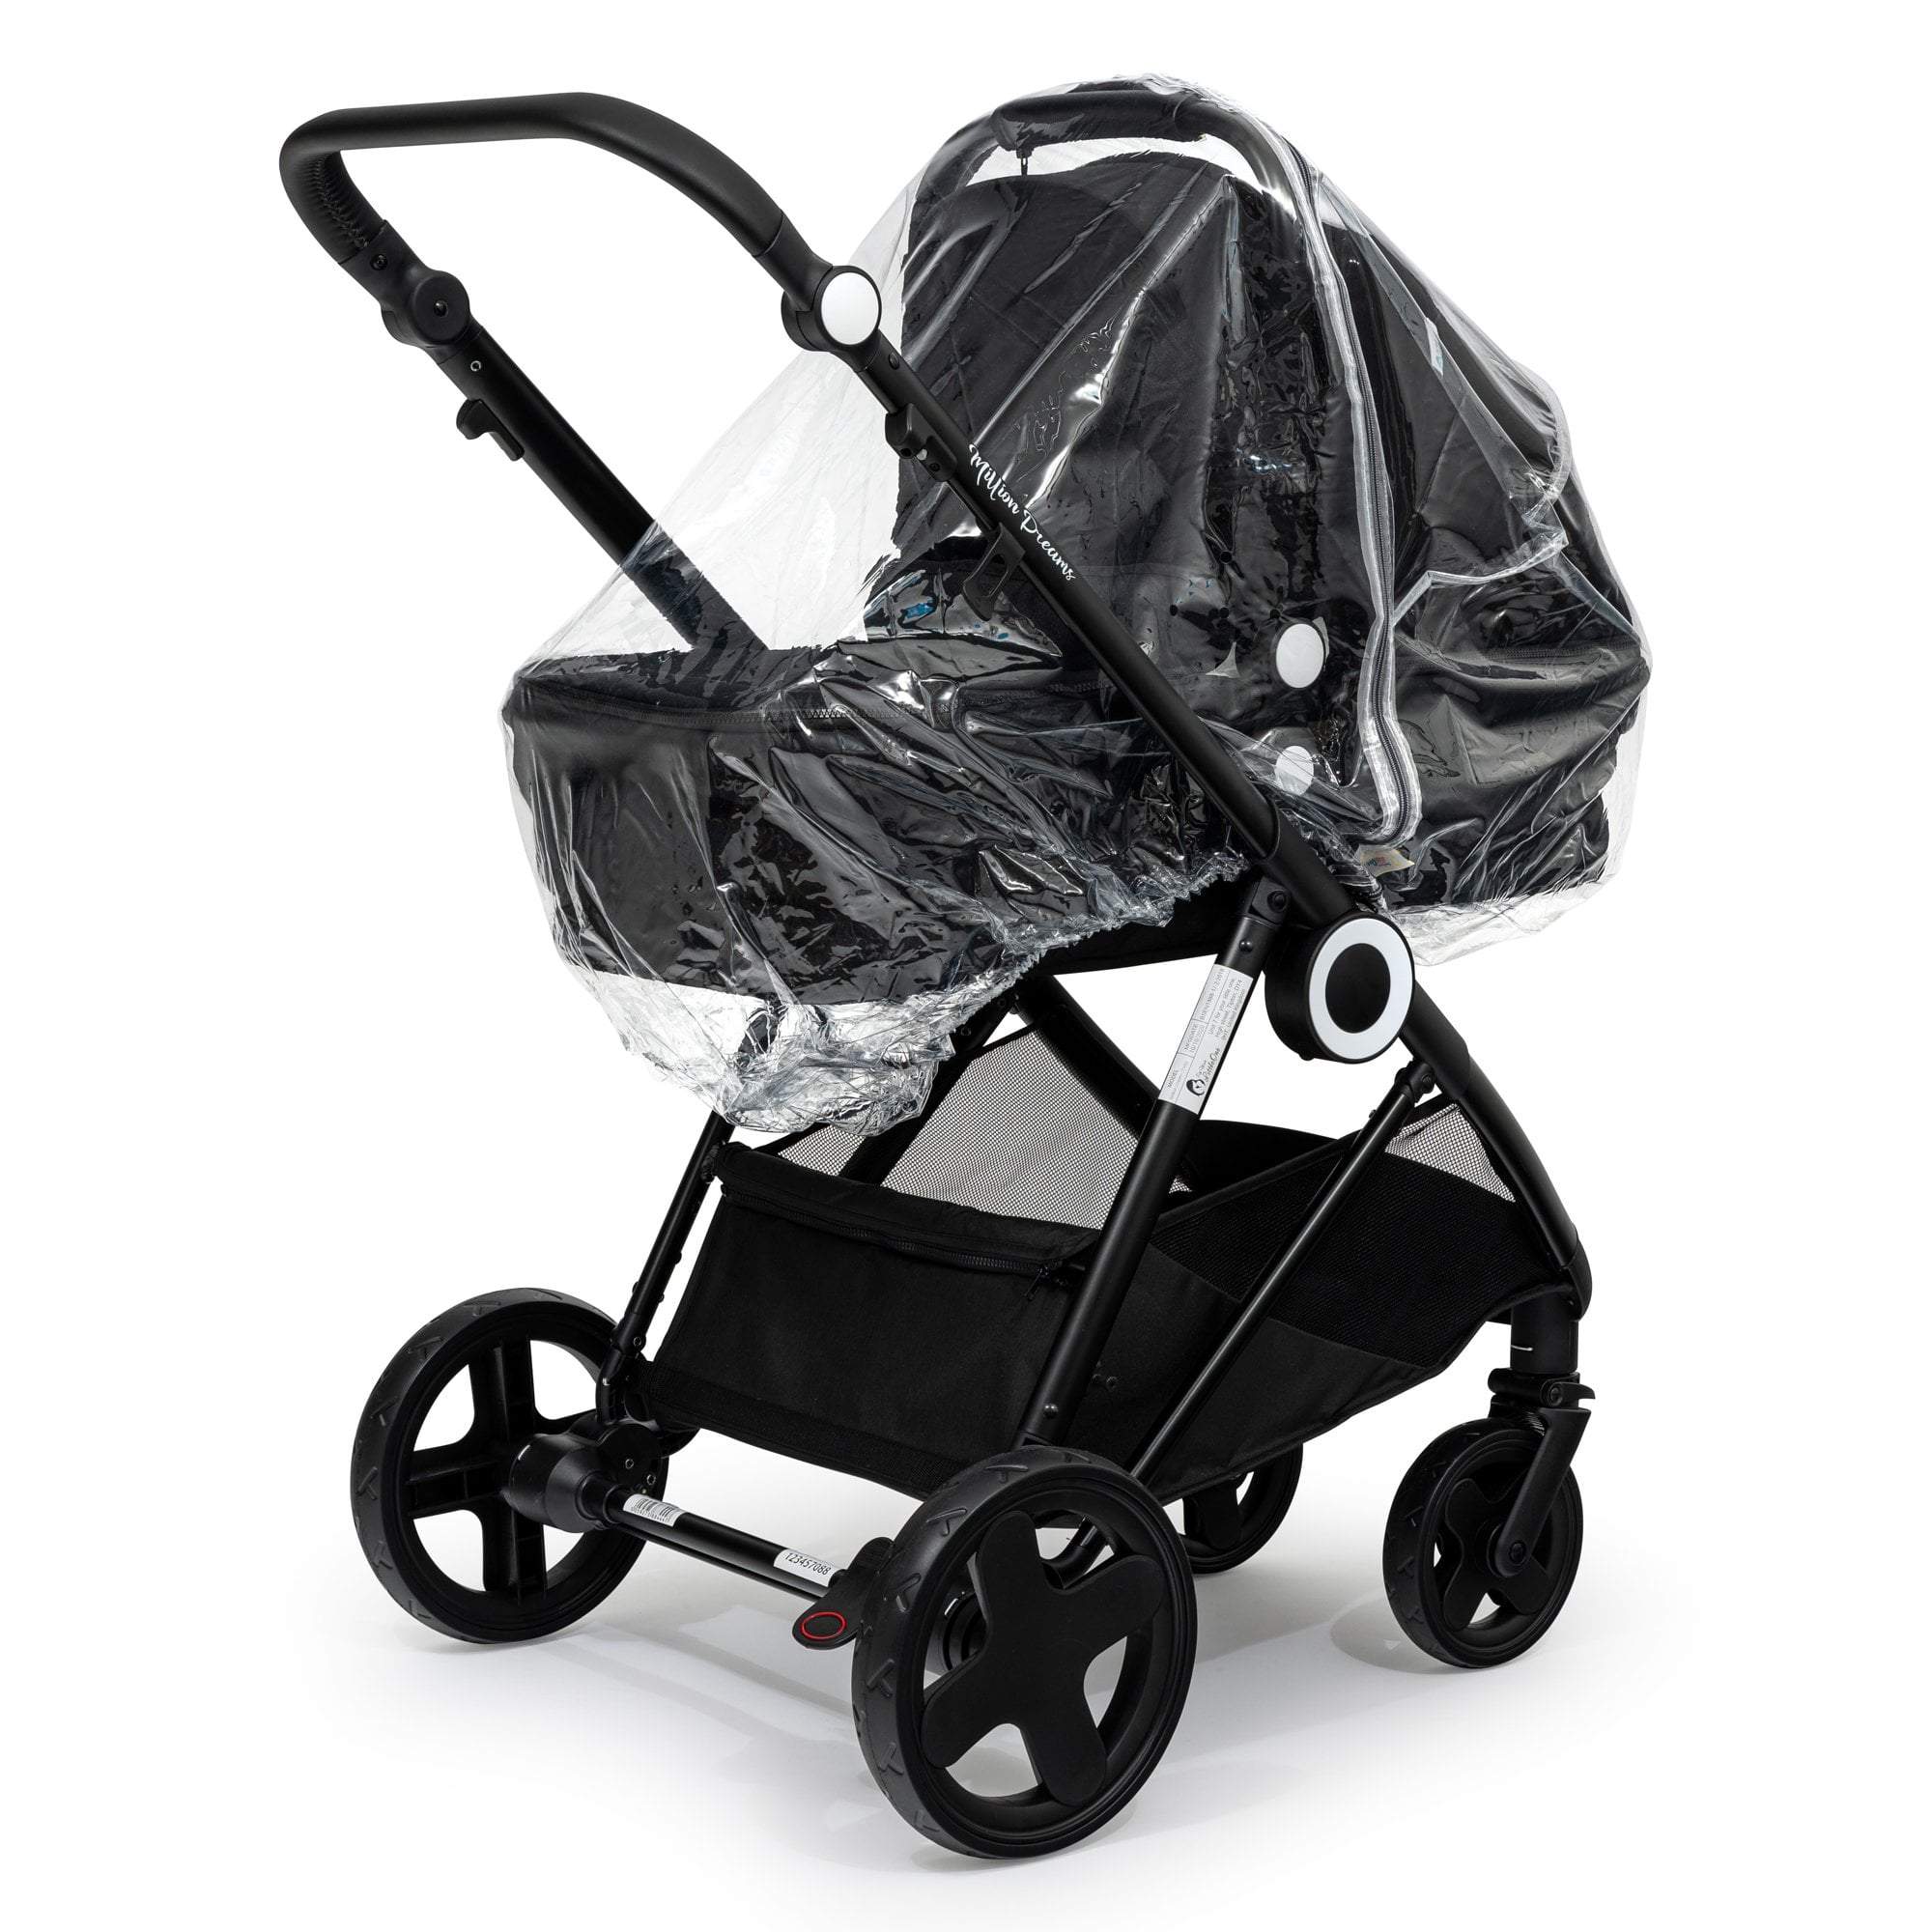 Carrycot Raincover Compatible With Bebecar - Fits All Models - For Your Little One